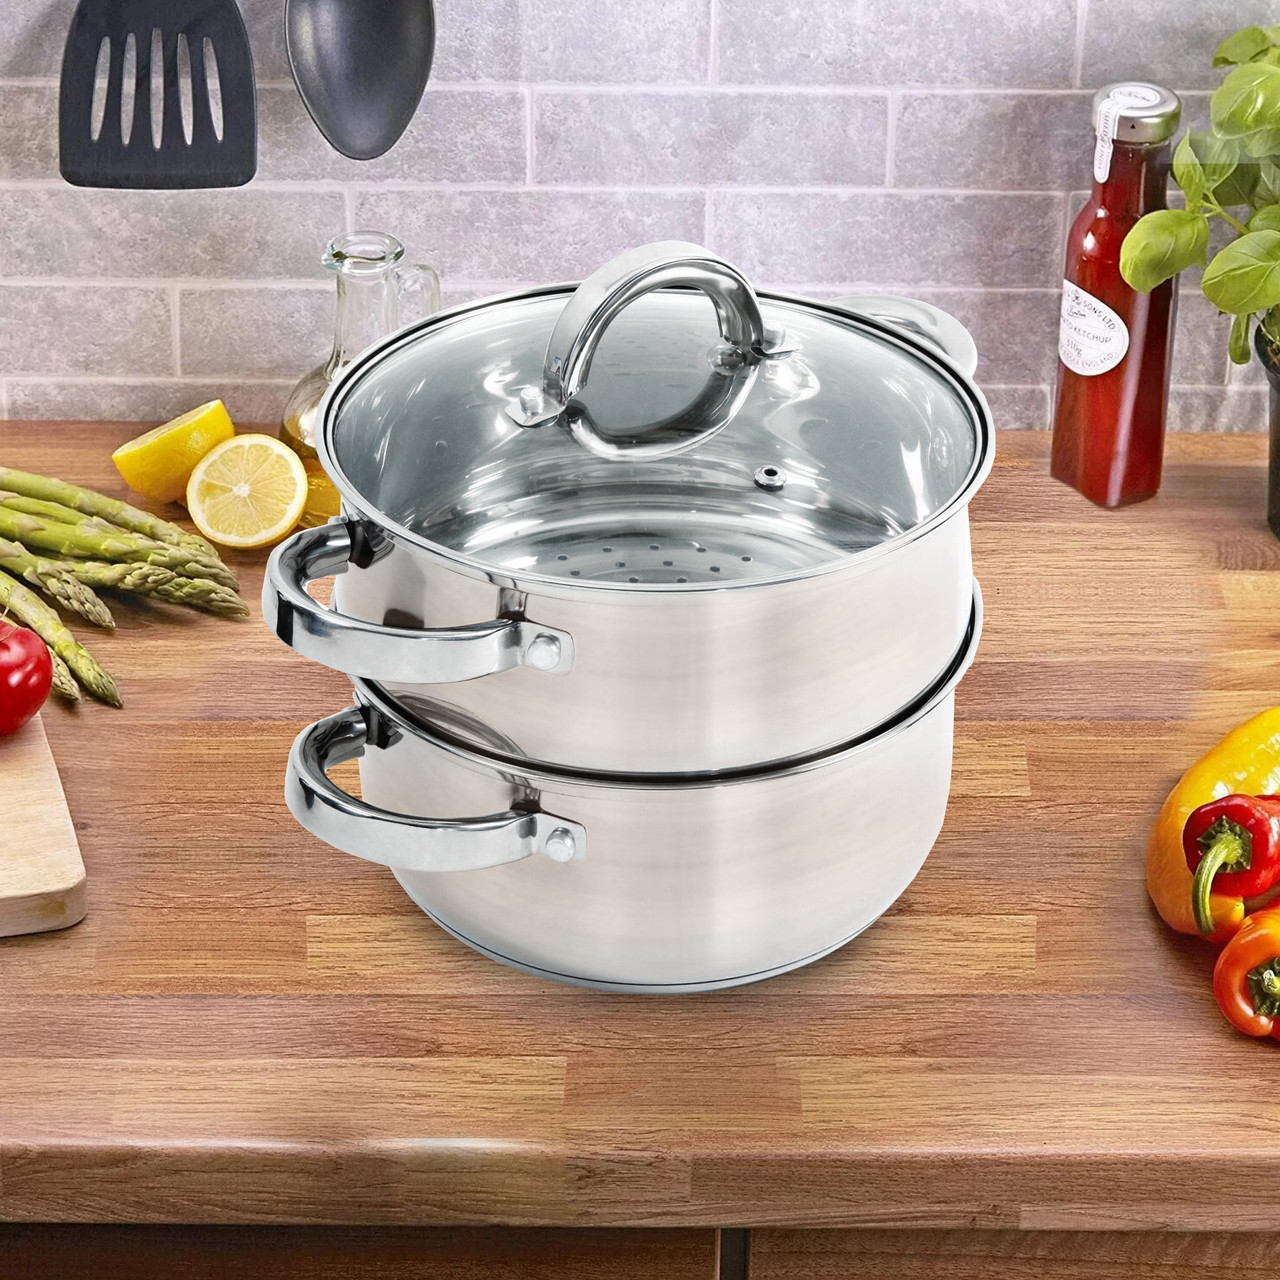 Oster 3 qt. Stainless Steel Steamer Pot with Lid & Reviews